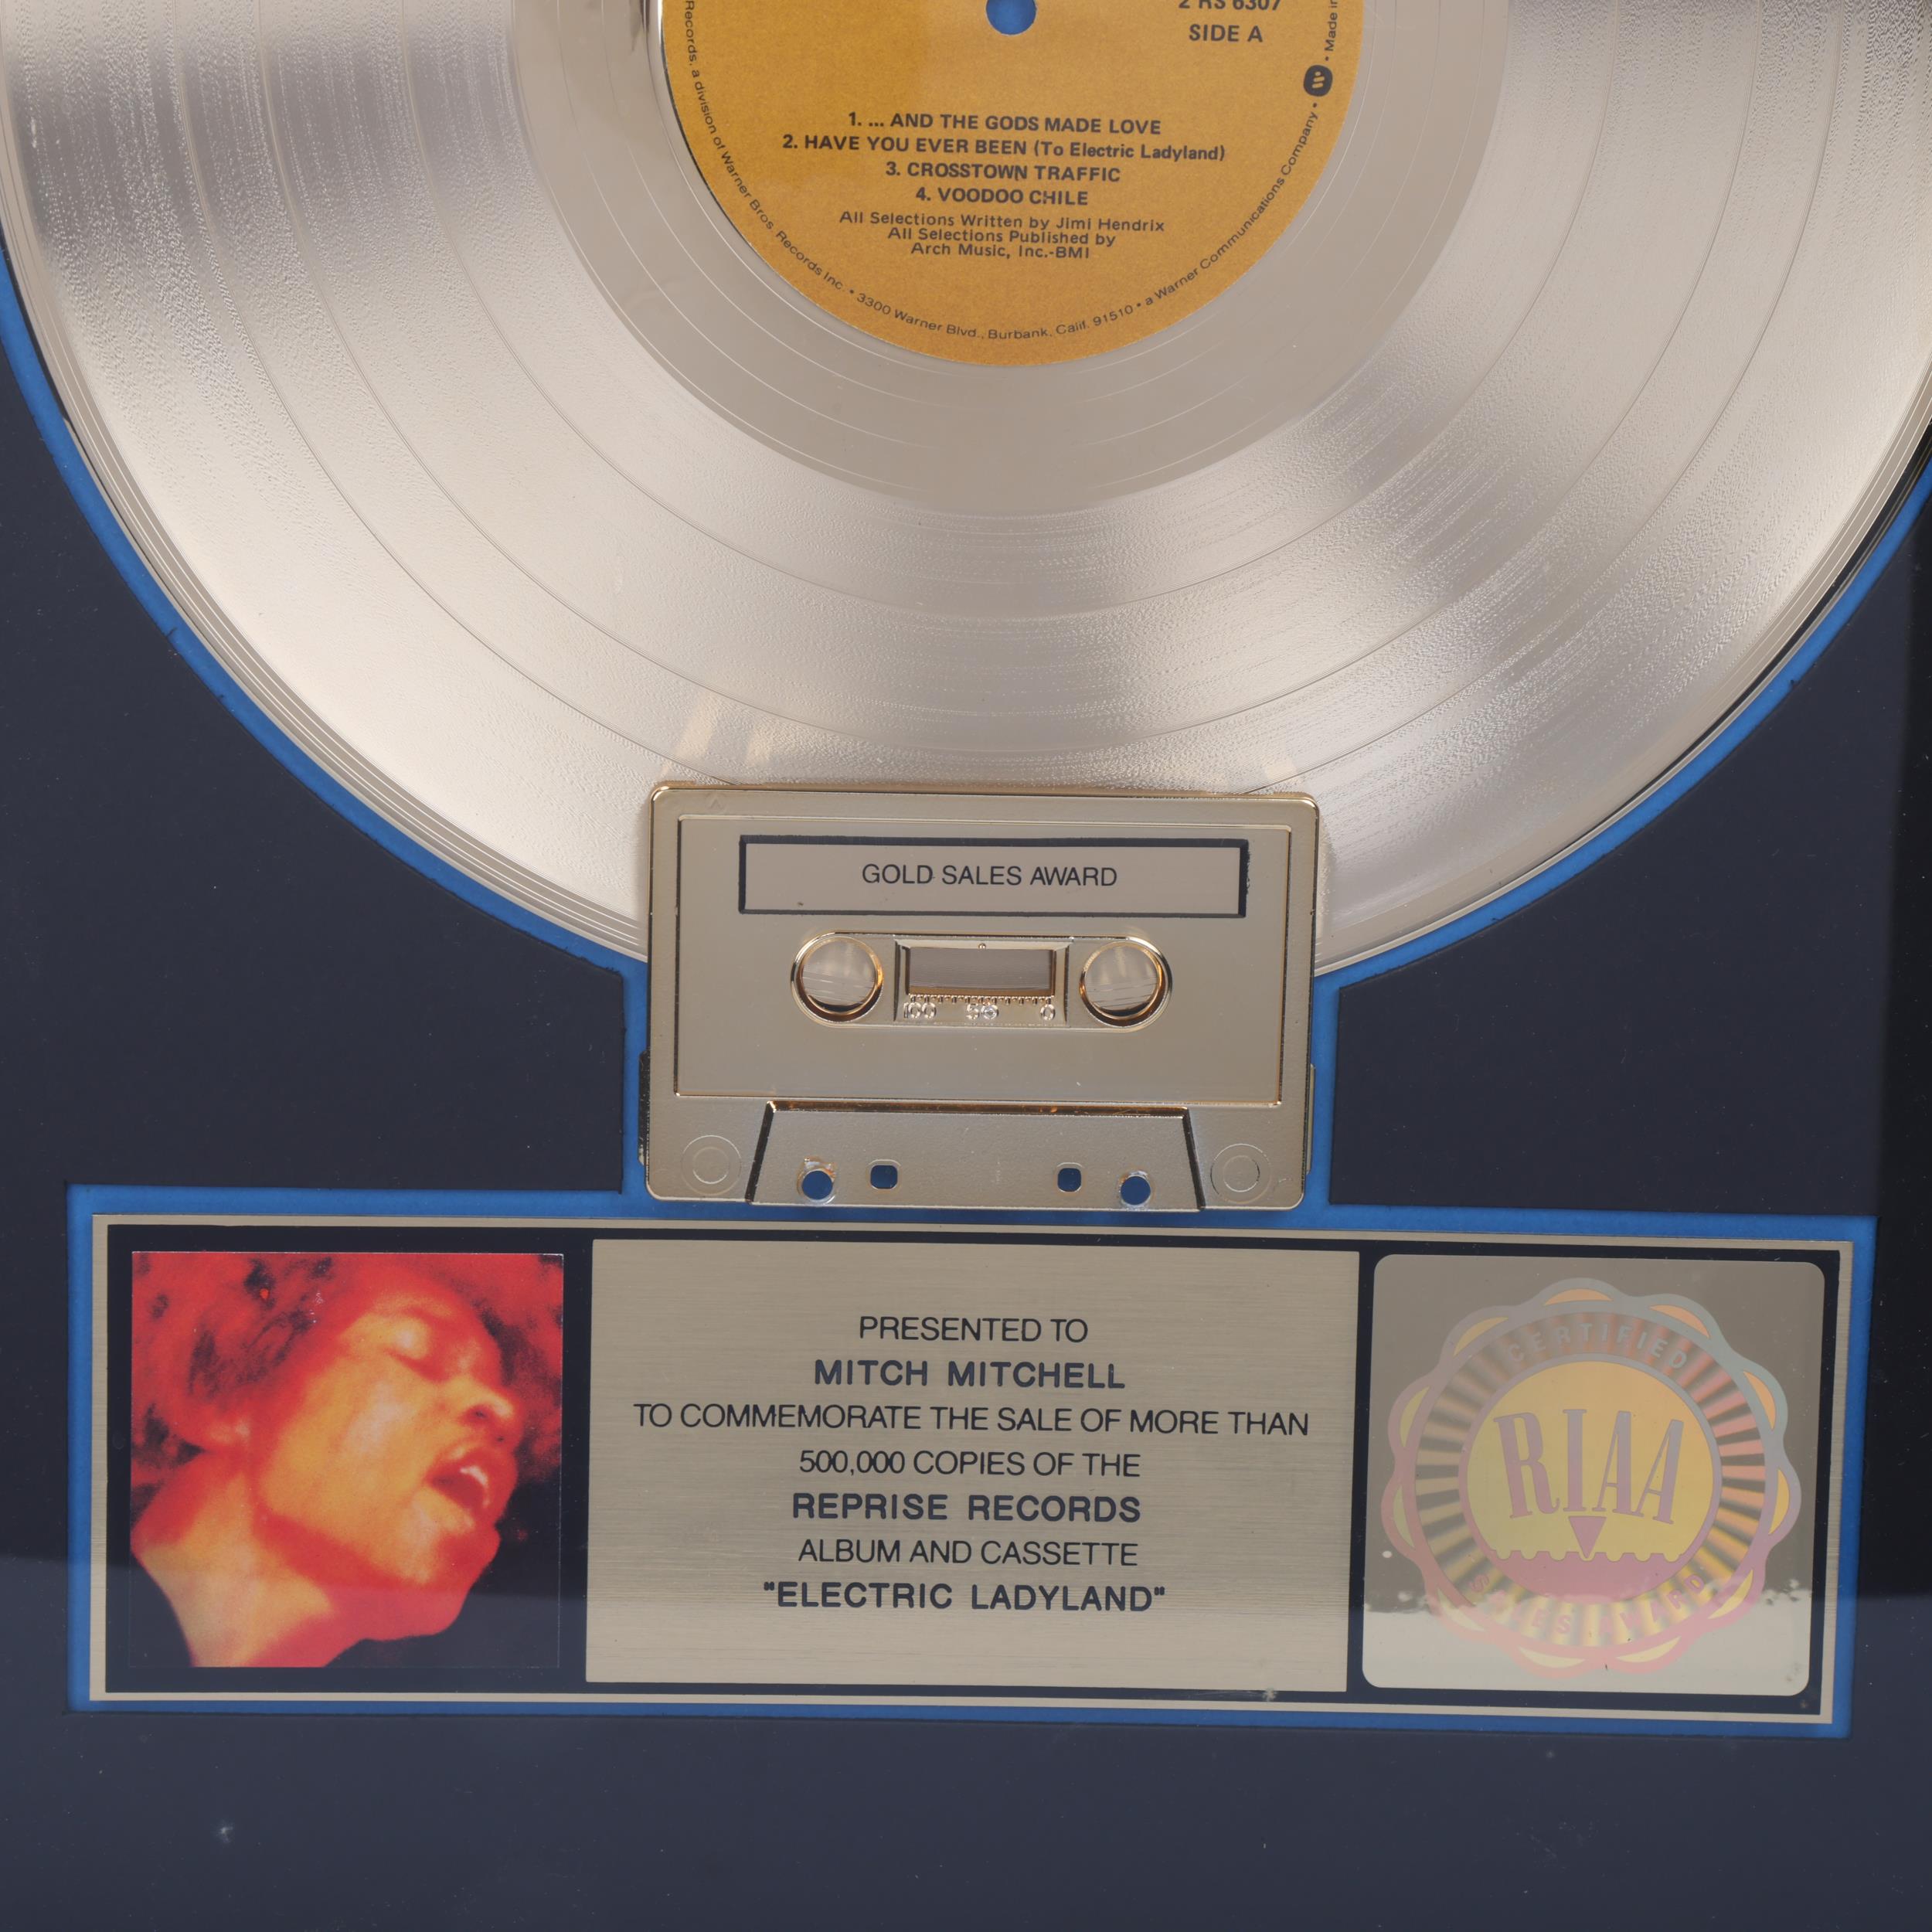 JIMI HENDRIX EXPERIENCE a GOLD DISC presented to MITCH MITCHELL to Commemorate The Sale of More Than - Image 2 of 3